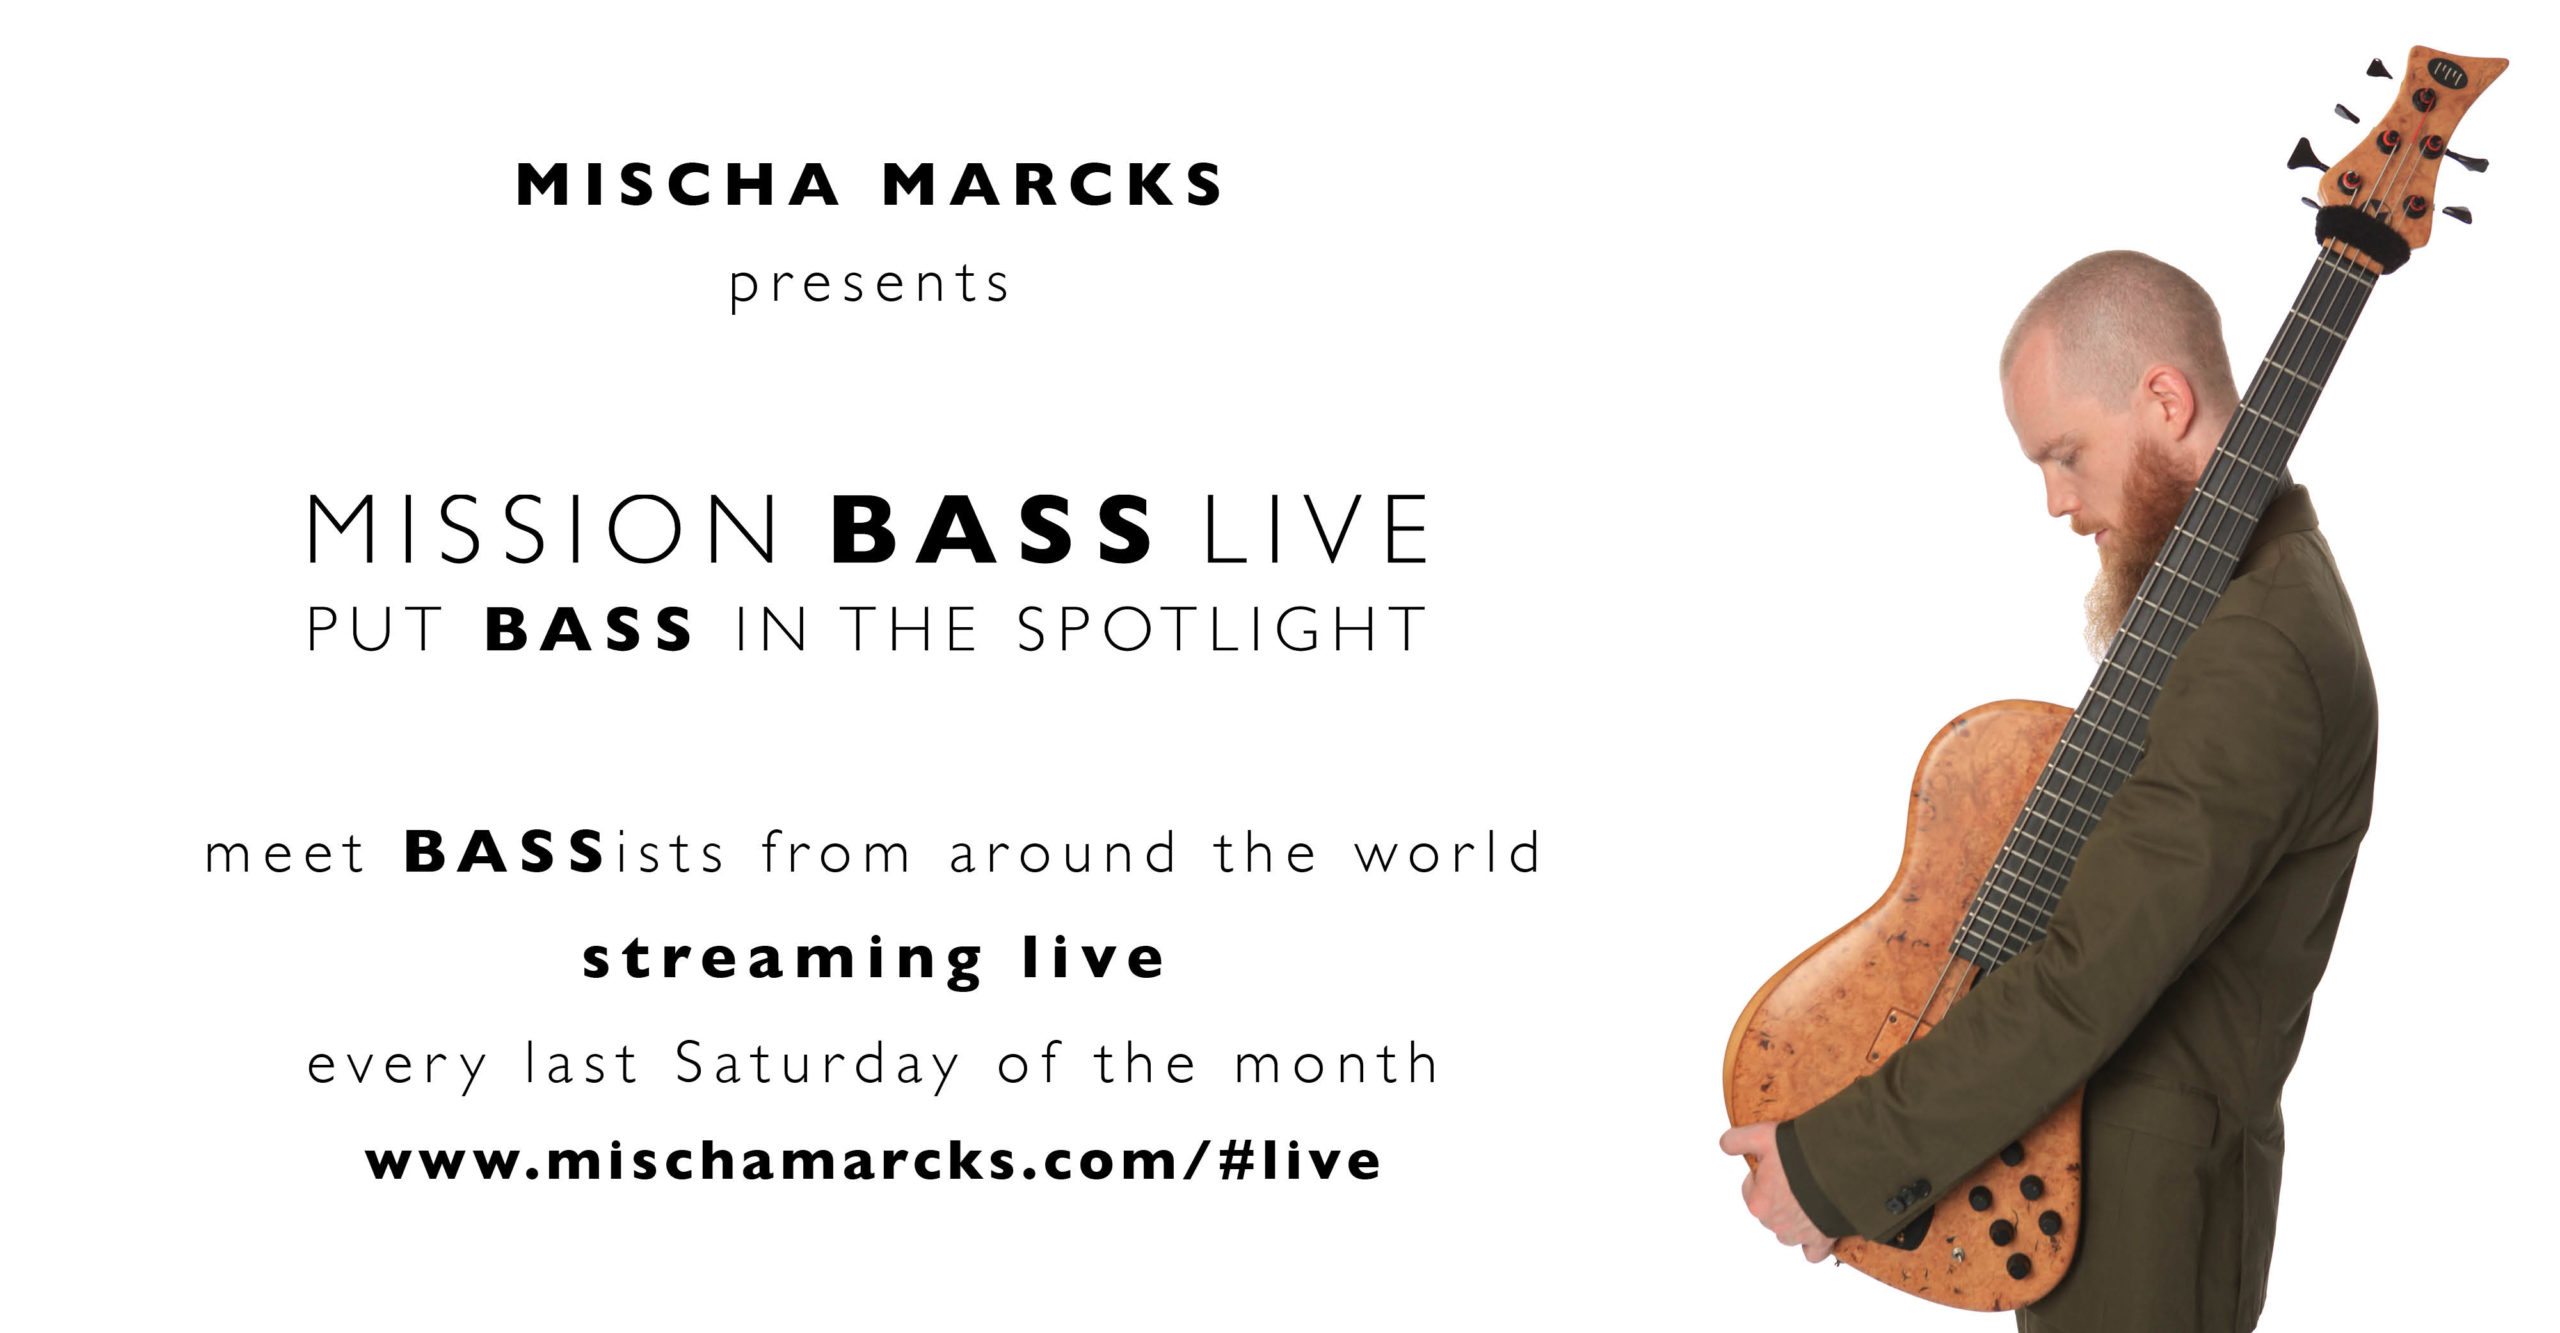 Mission bass live Mischa Marcks solo bass education live streaming